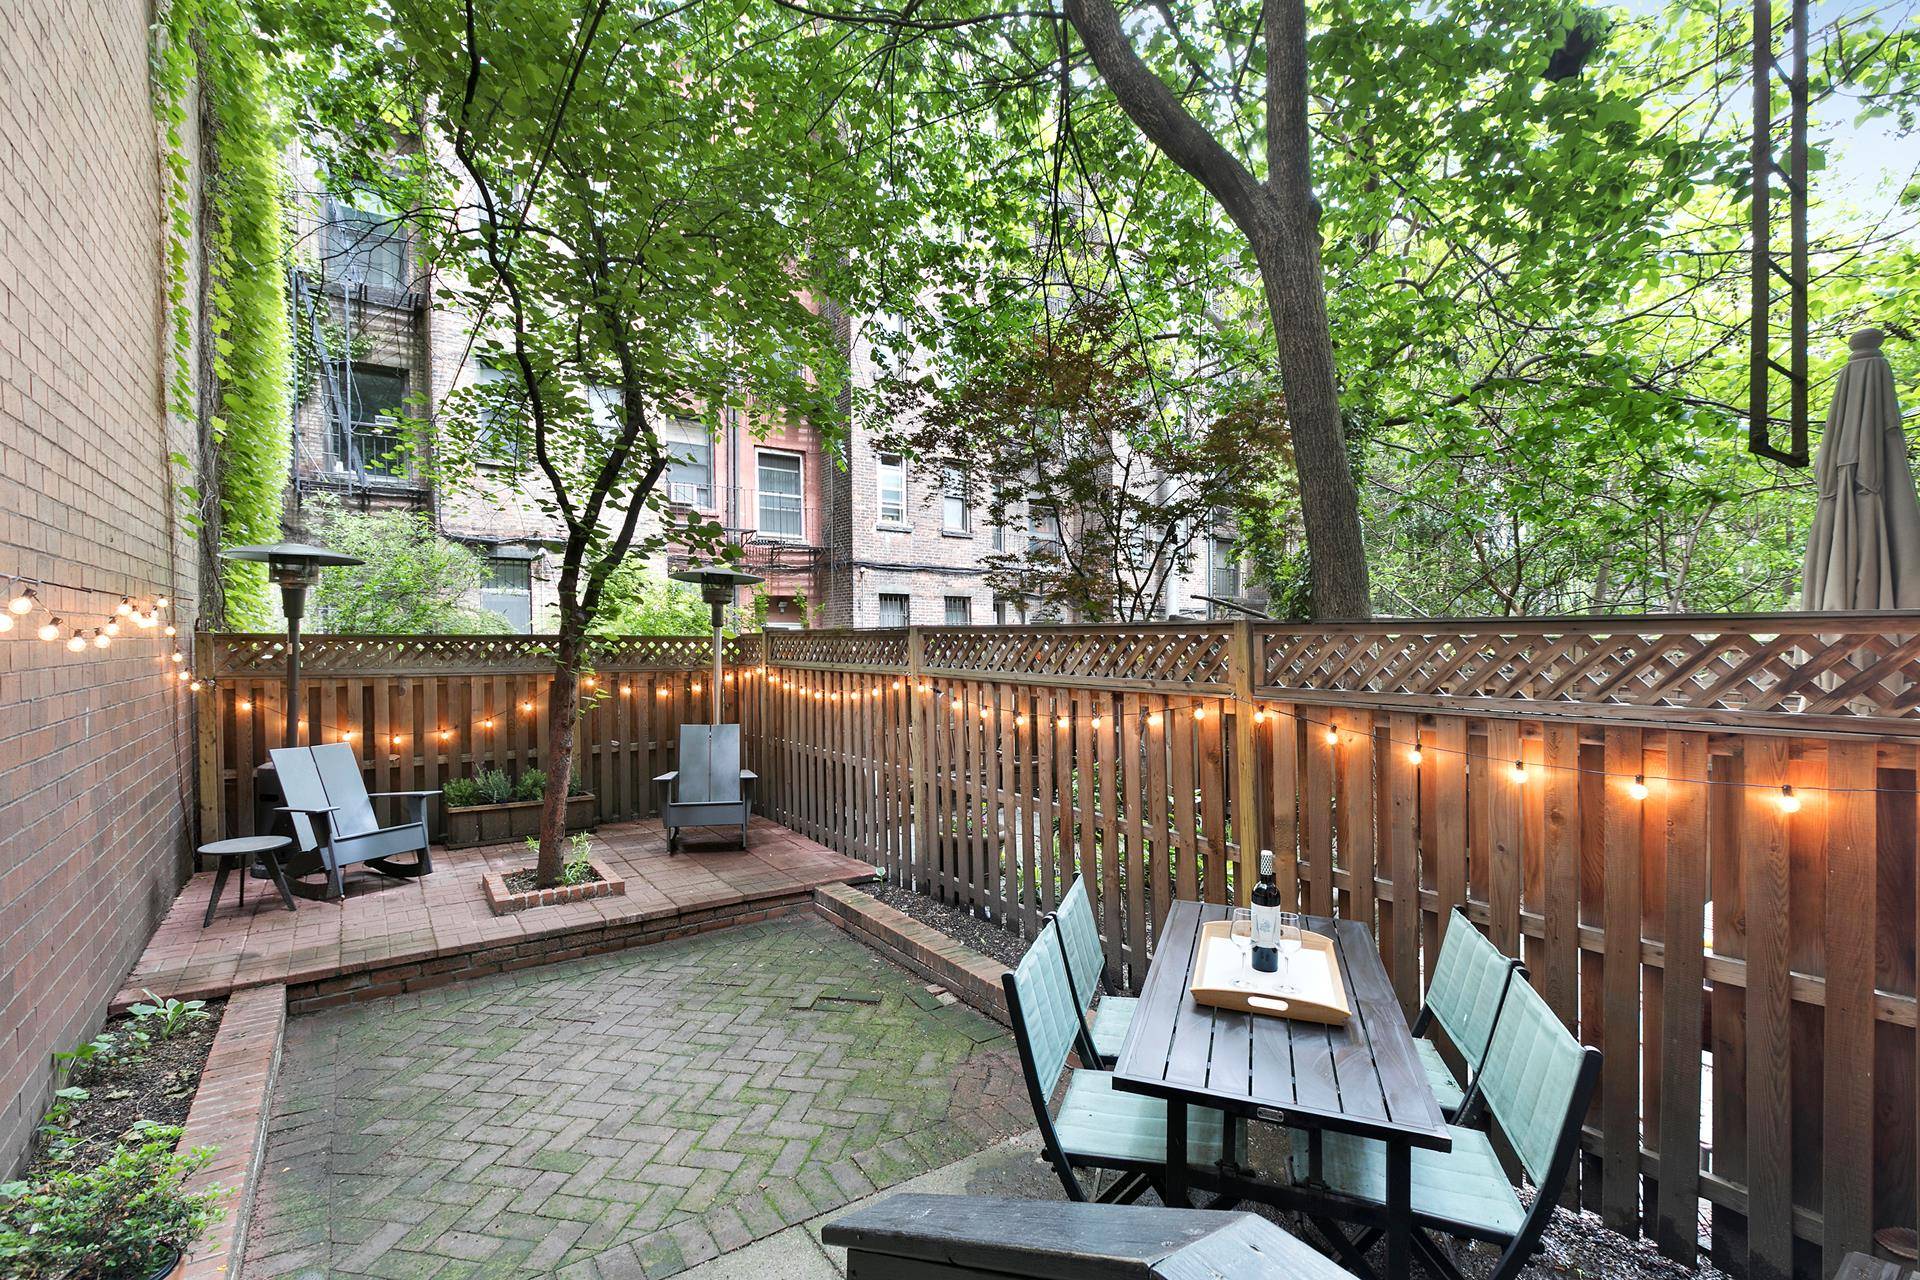 Back on the Market. Take advantage of the amazing private outdoor space 250 sf at this charming Upper East Side, pin drop quiet Studio in time for late Summer Fall ...